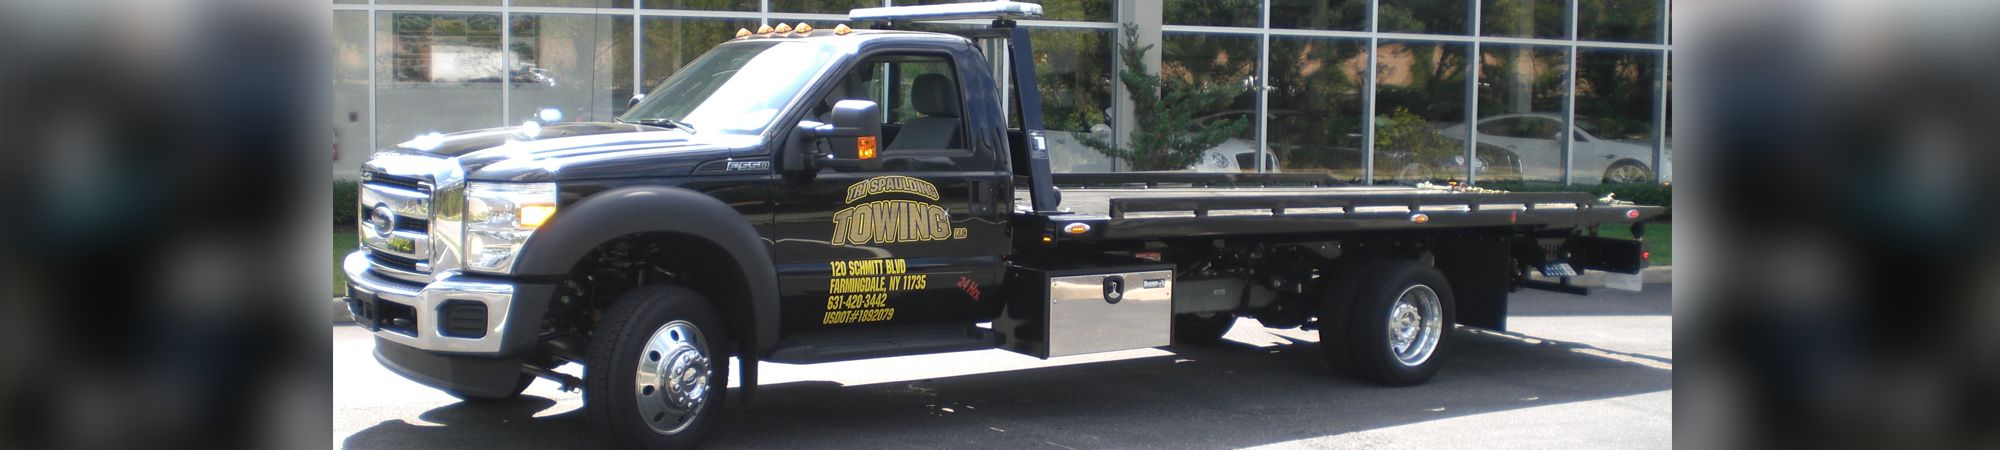 We offer quality towing services in Farmingdale, NY, from our tow truck.